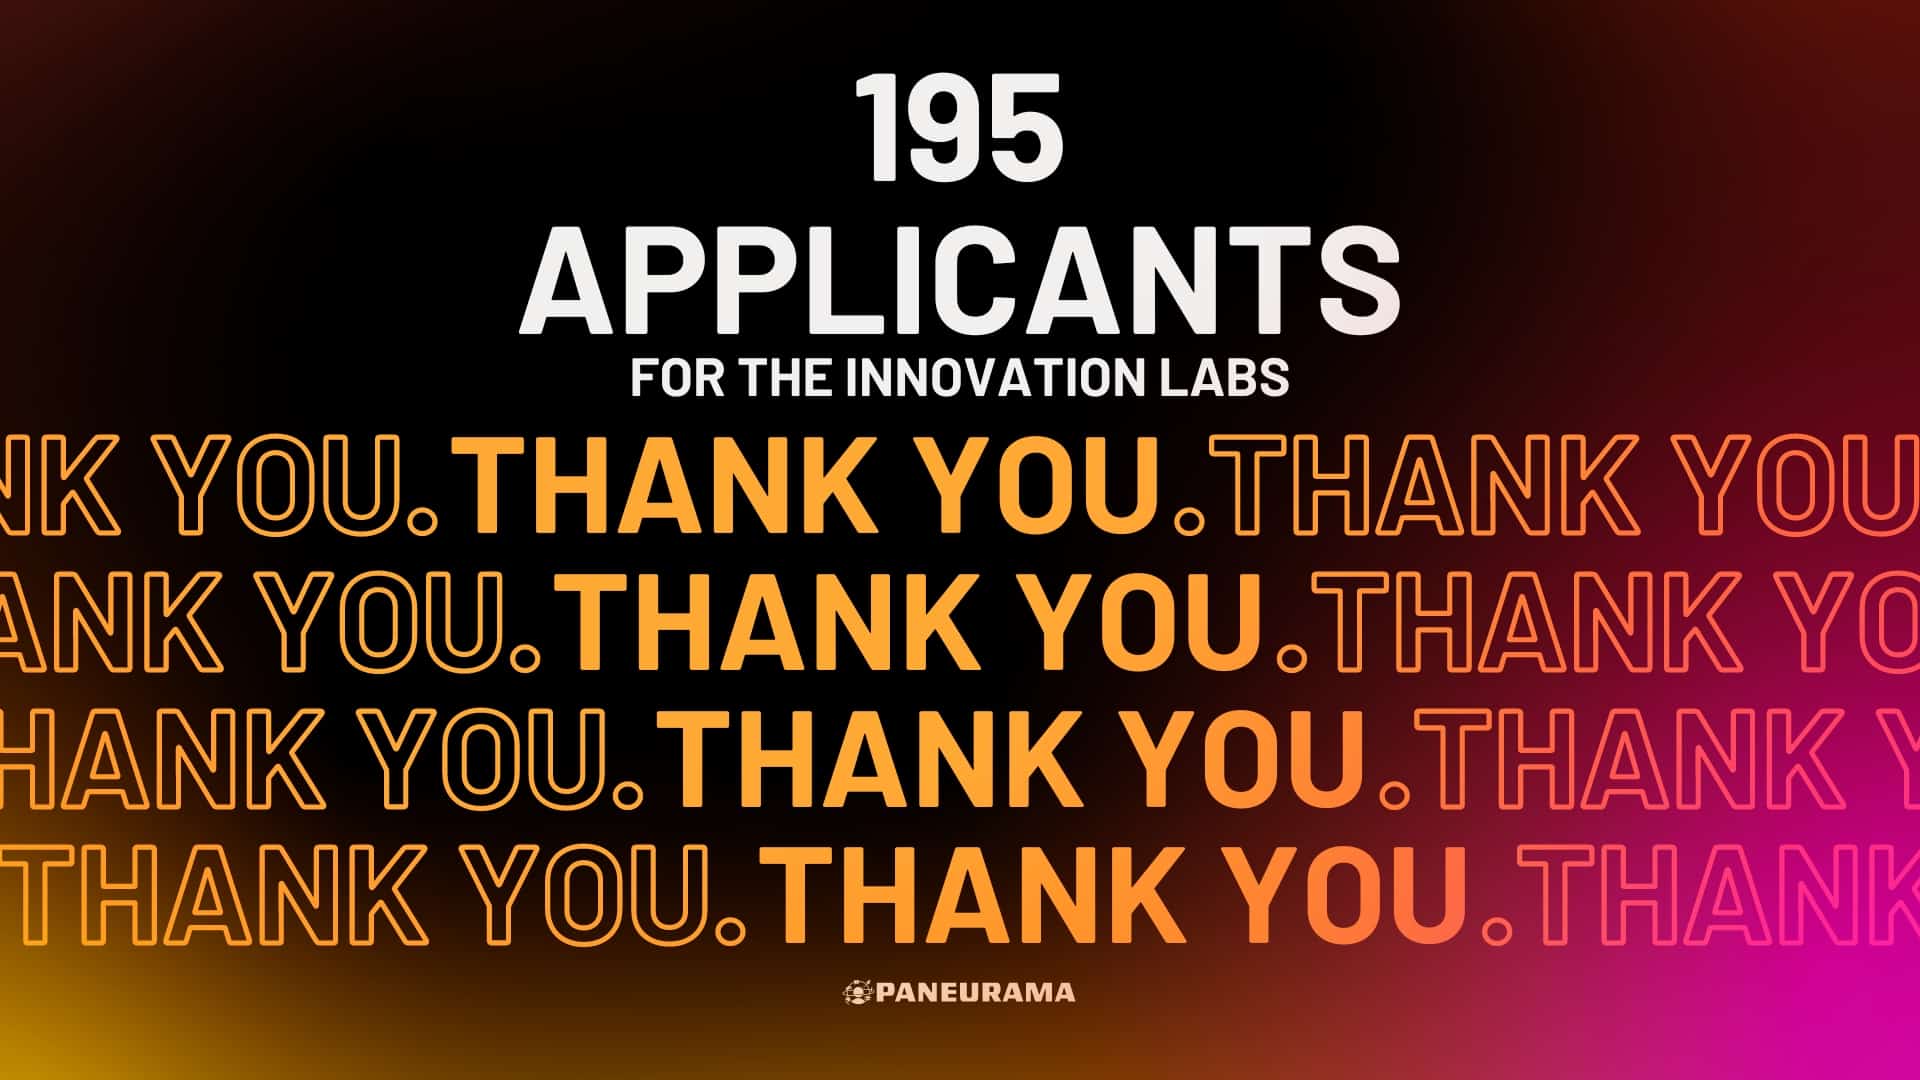 Thank you to our 195 applicants who signed up for the PANEURAMA Innovation Labs!